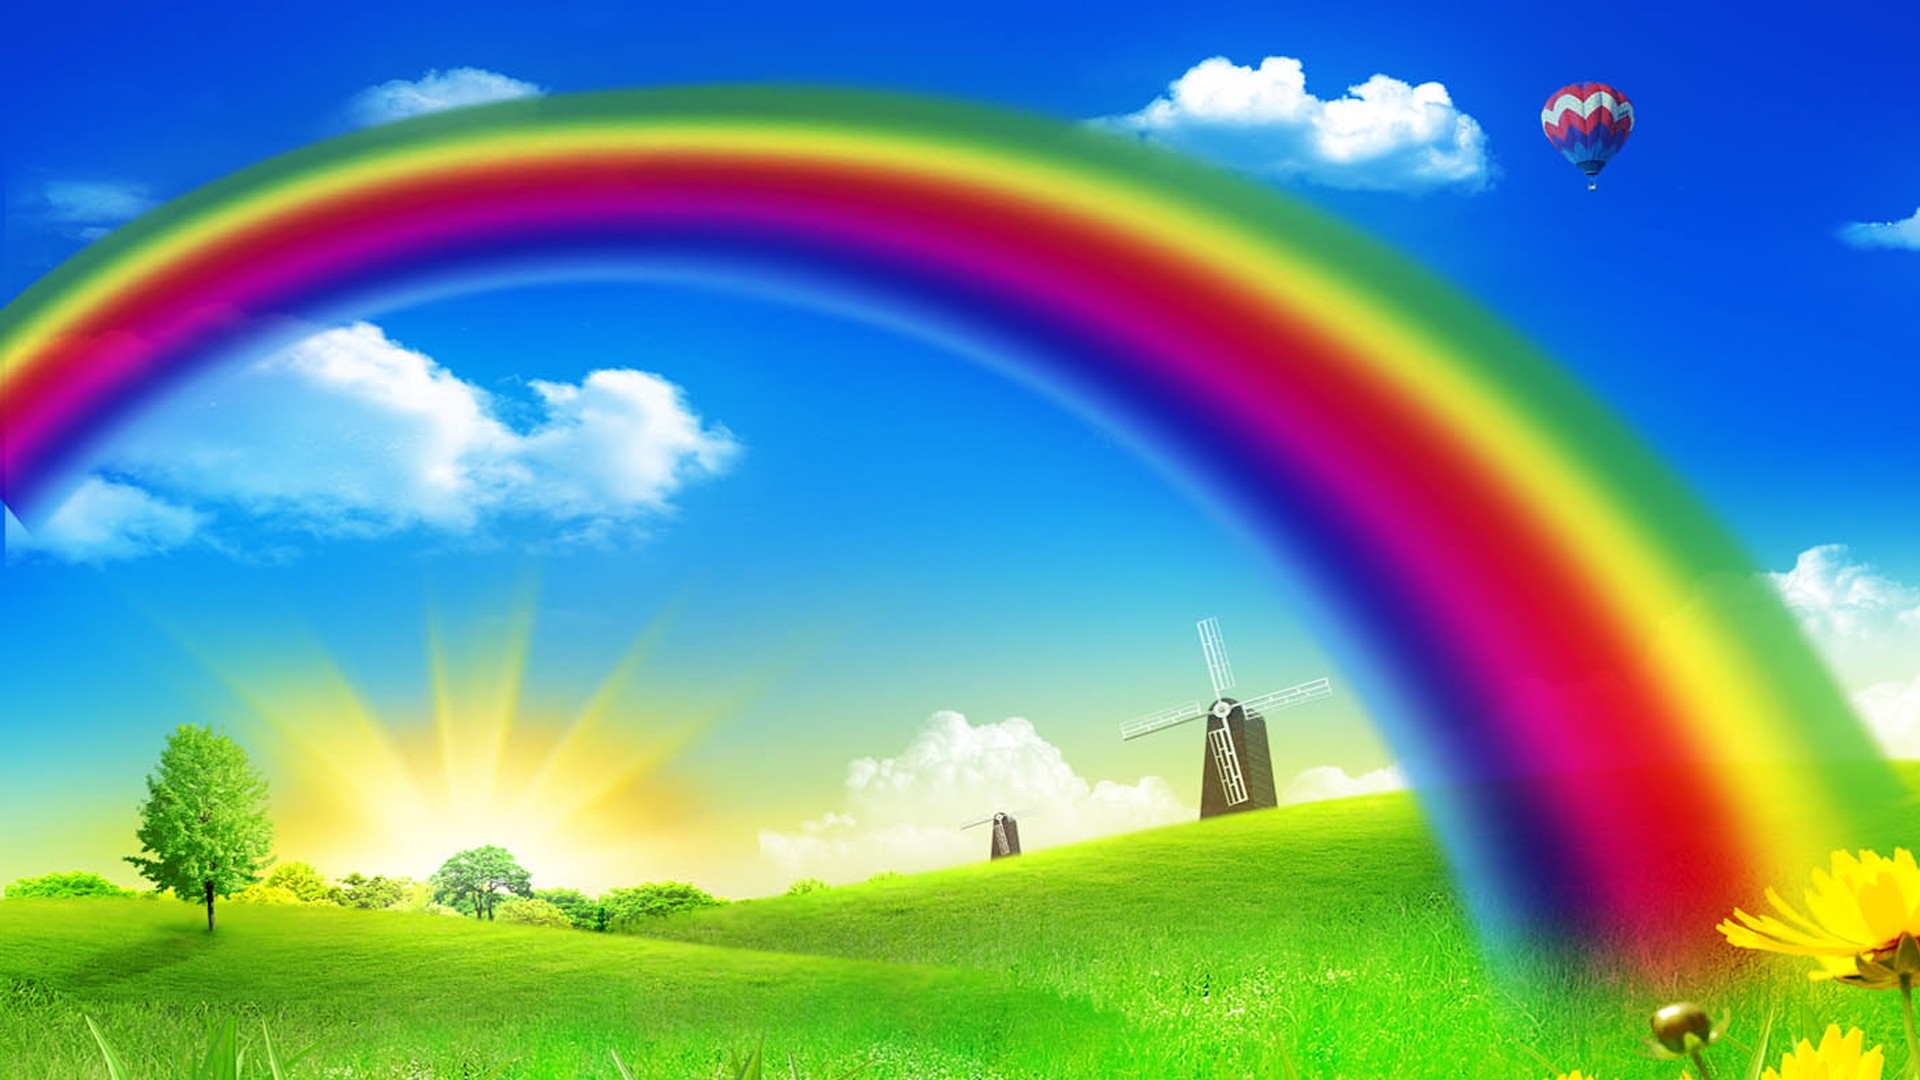 Cute Rainbow Desktop Backgrounds HD with resolution 1920X1080 pixel. You can use this wallpaper as background for your desktop Computer Screensavers, Android or iPhone smartphones